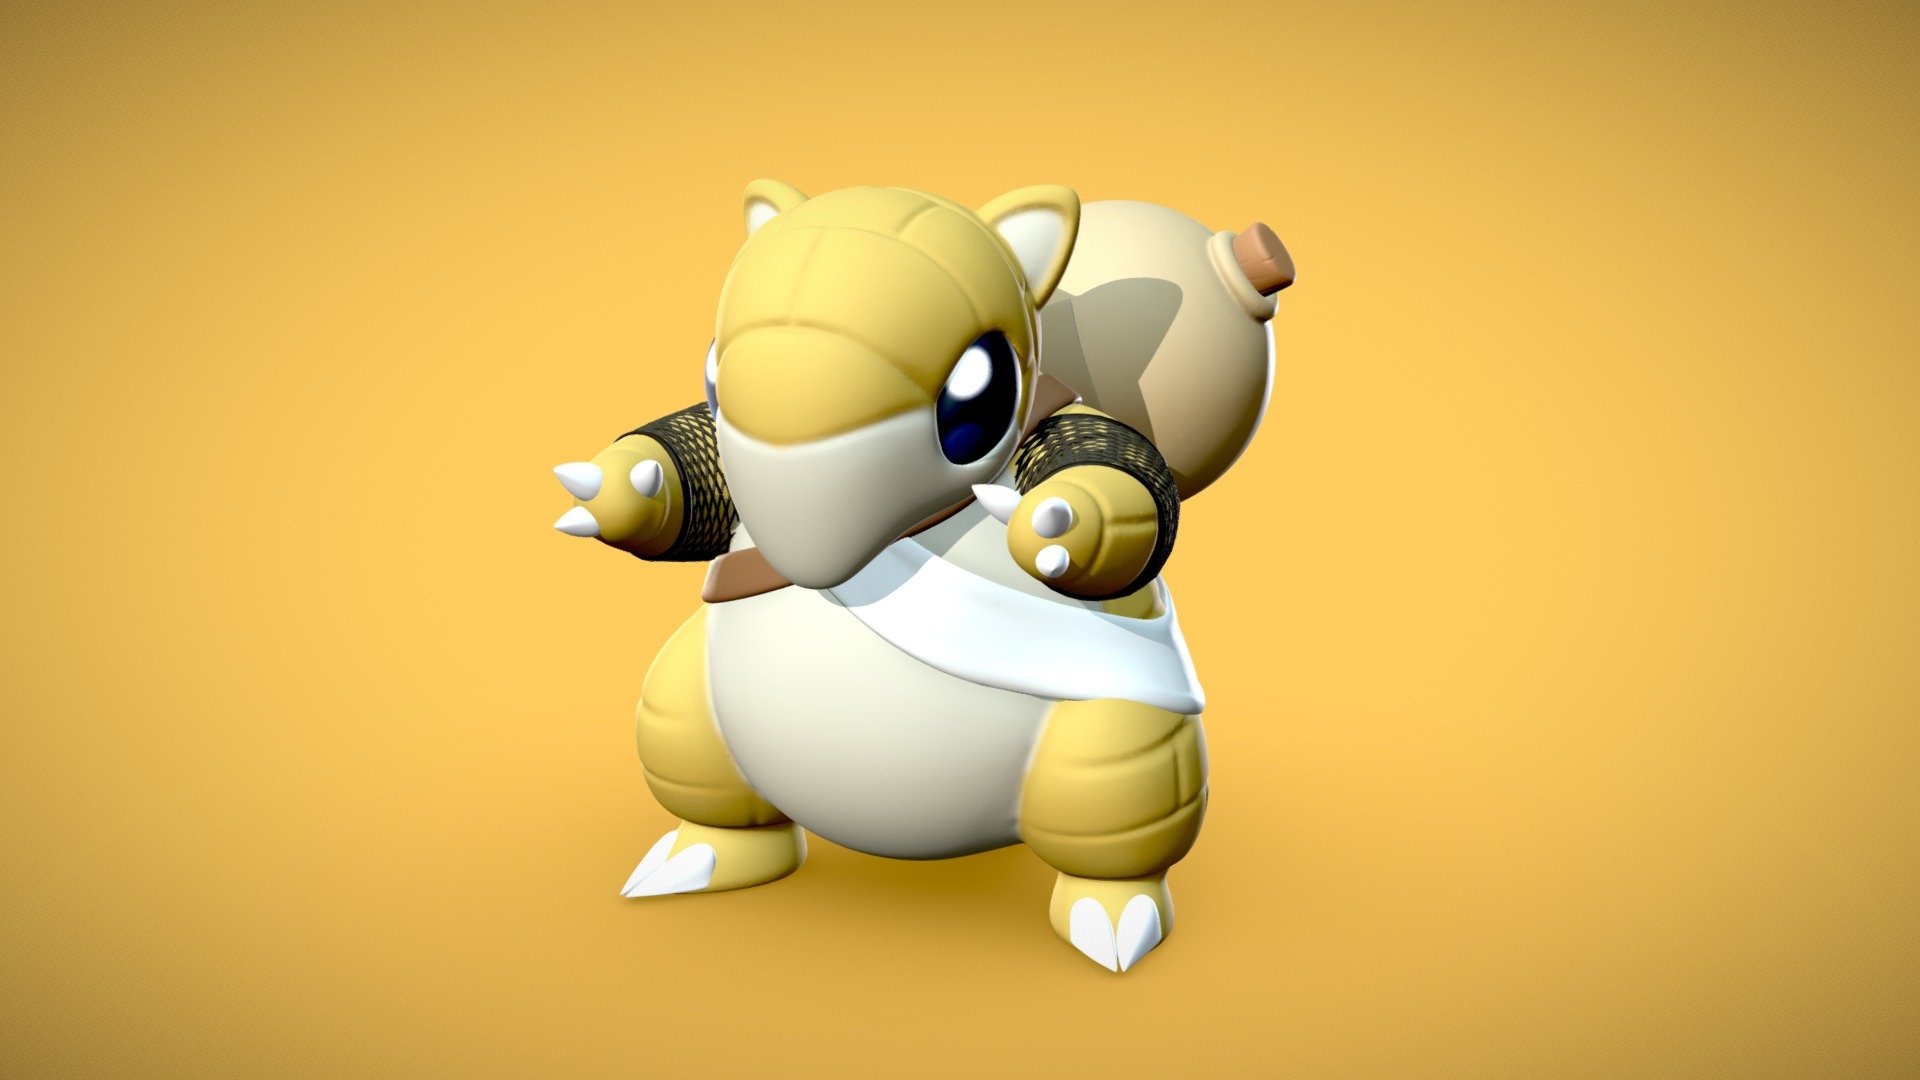 The first model of the 2nd collection of the crossover between Pokemon and Naruto.

Image Gallery

**Collection: **




Sandshrew Gaara : https://skfb.ly/ouuozD

Snorlax Chouji : https://skfb.ly/ouunC

Raticate Gai : https://skfb.ly/ouvqt

Mewtwo Madara : https://skfb.ly/ouz8T

printed by FenMiHuo

 - Sandshrew Gaara - 3d print  - Naruto Collection - Buy Royalty Free 3D model by LessaB3D 3d model